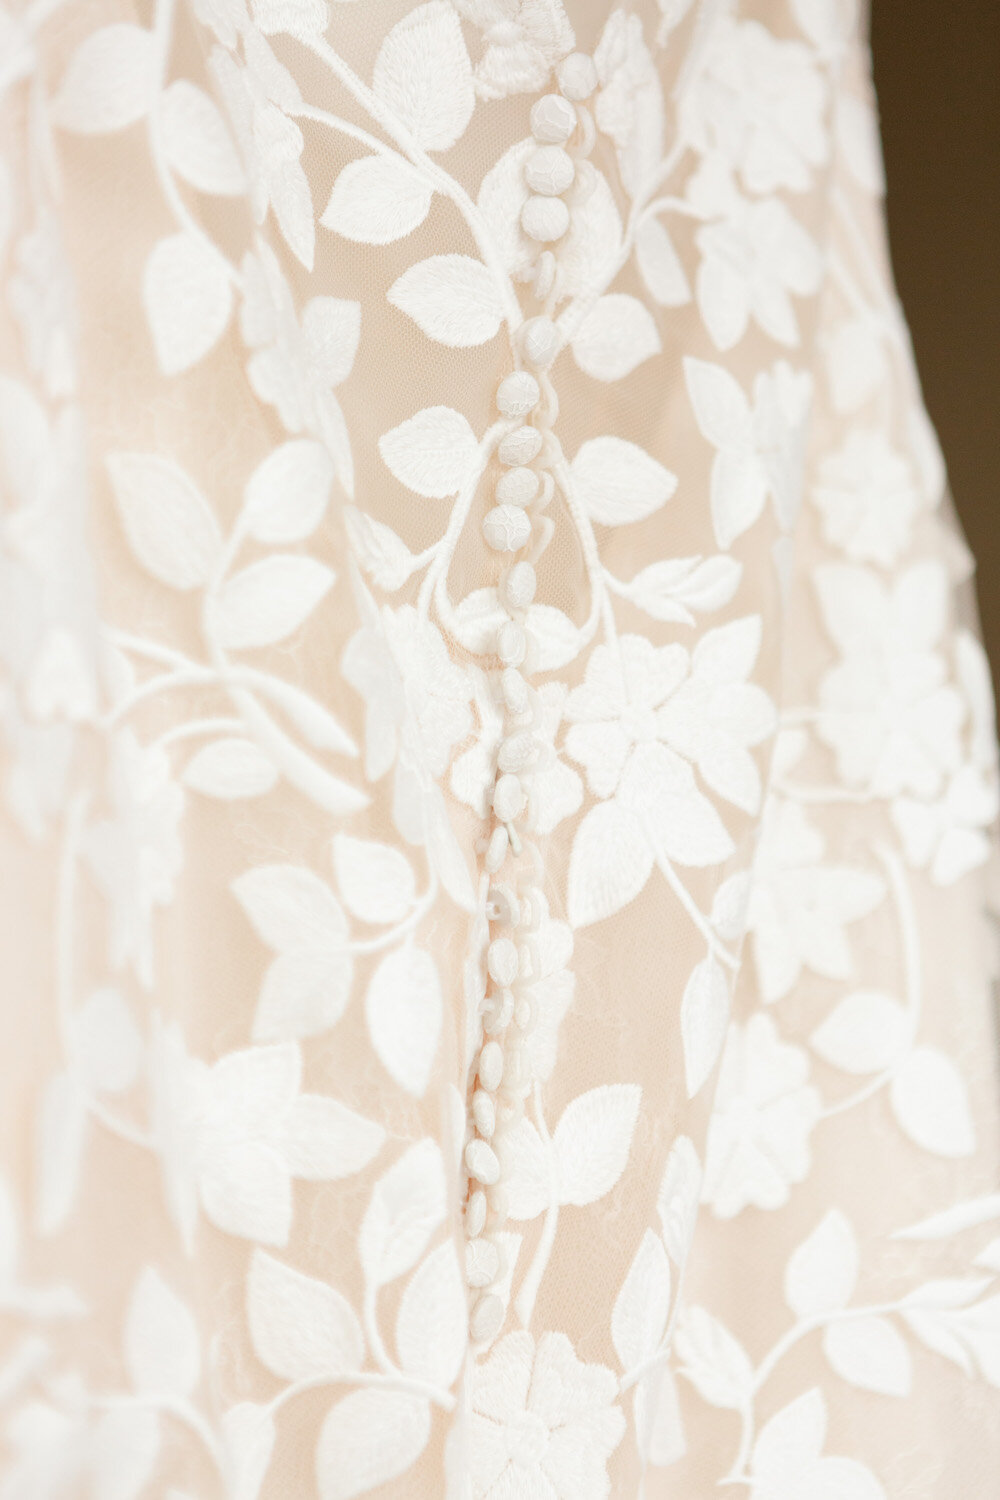 Lace Detail of Wedding Dress